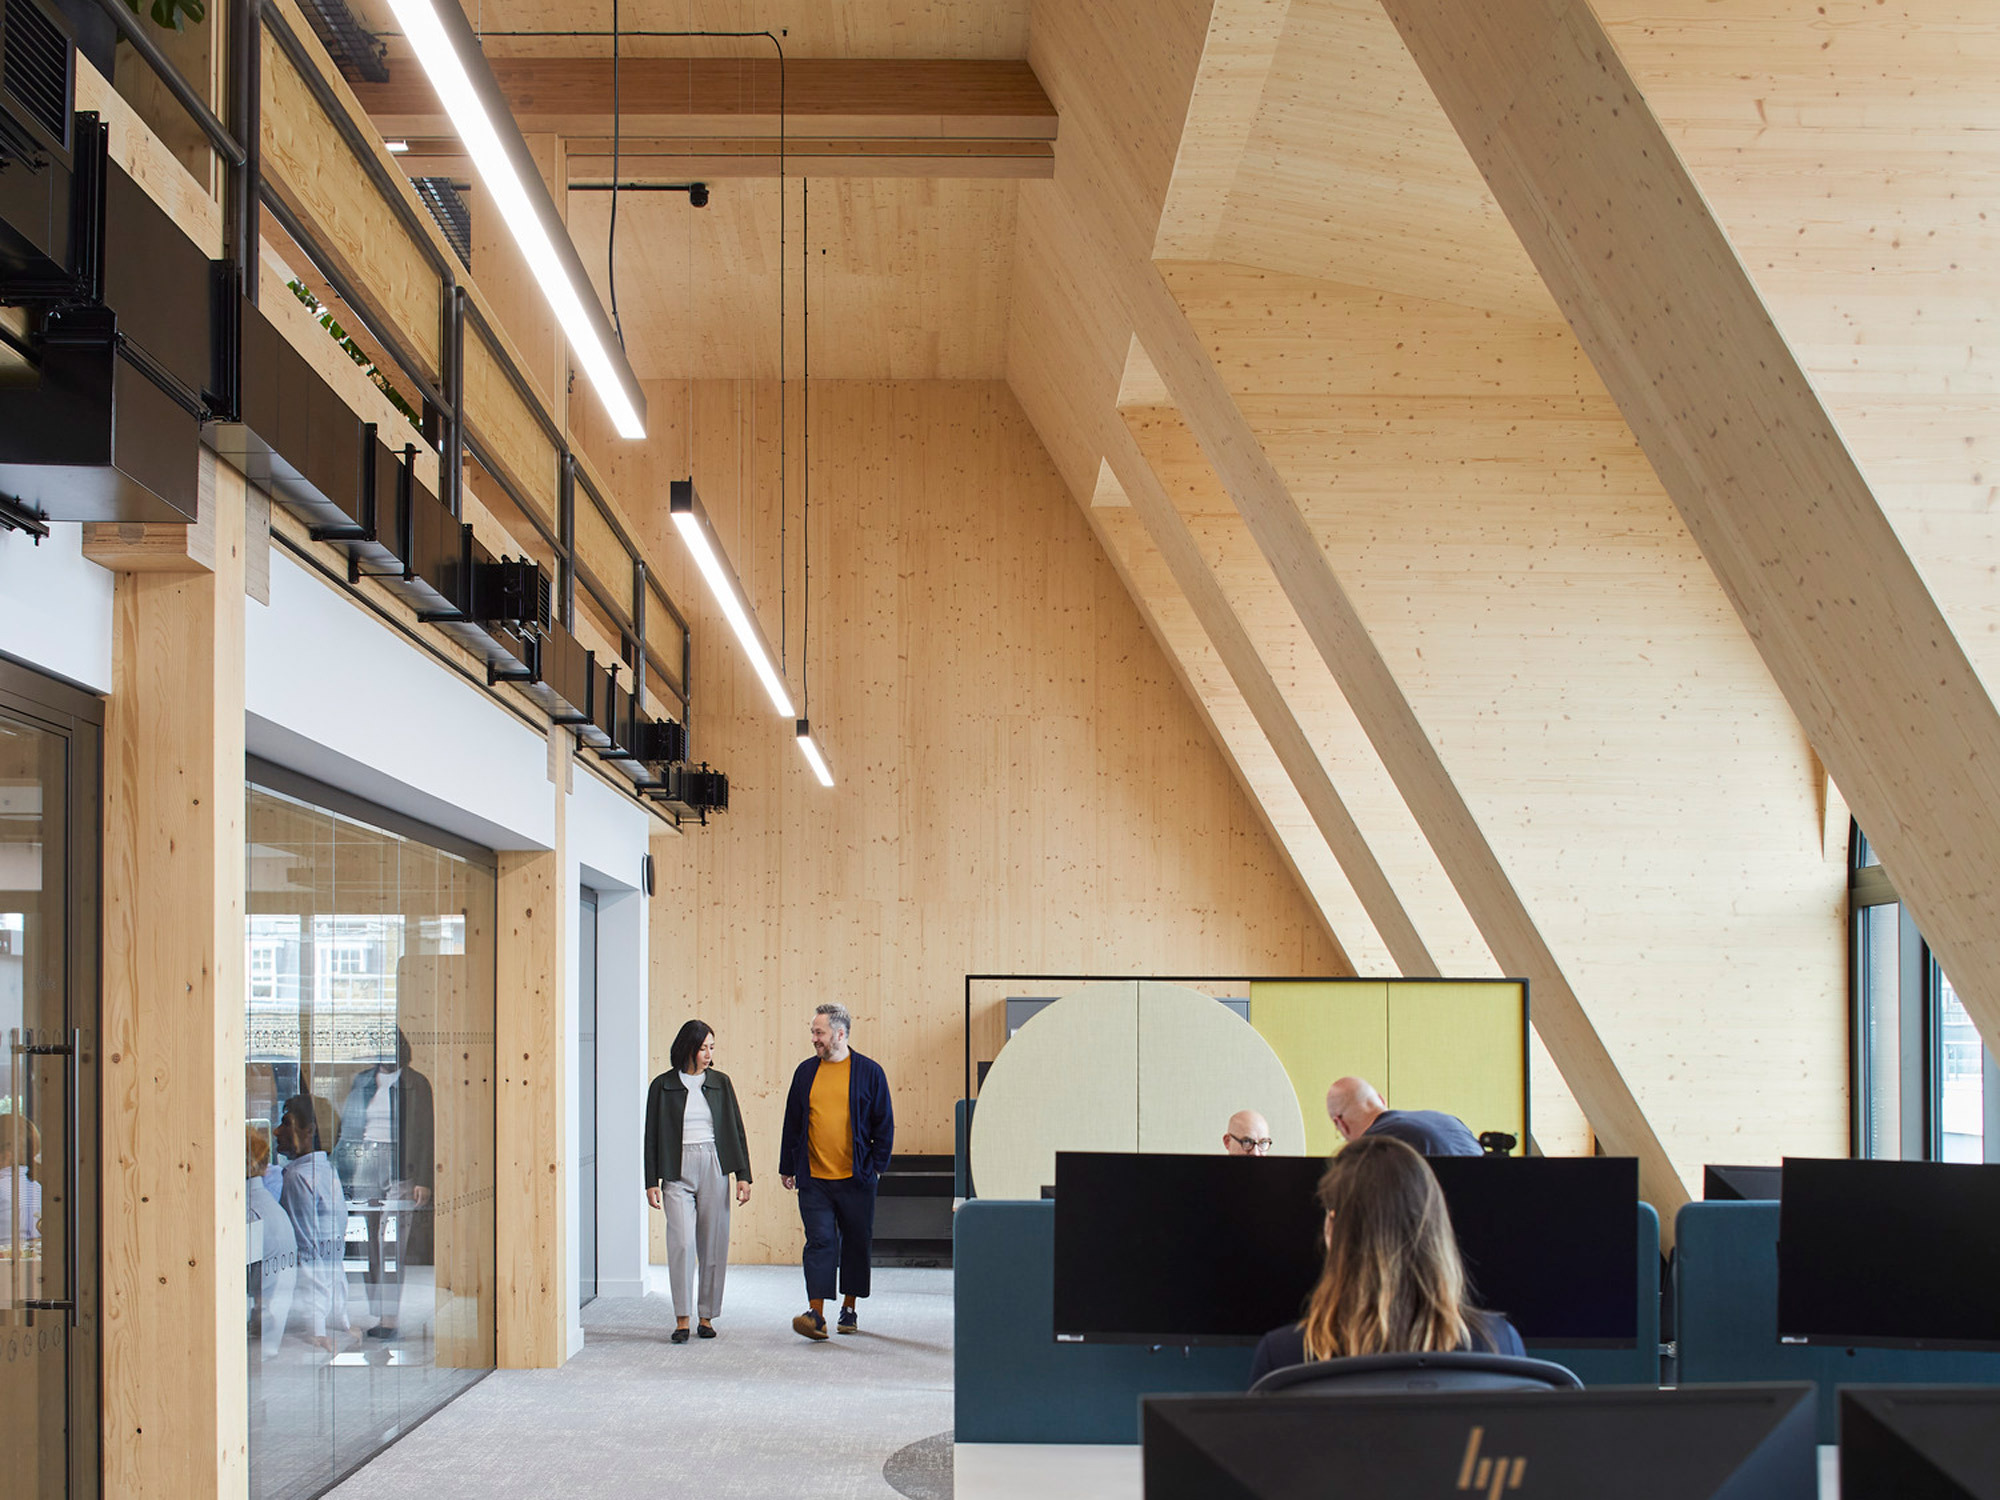 Modern office interior showcasing exposed wooden beams and full-height glazing that floods the multi-tiered workspace with natural light. Open-plan desks are set against a backdrop of warm wooden cladding, enhancing the space's contemporary and inviting atmosphere.